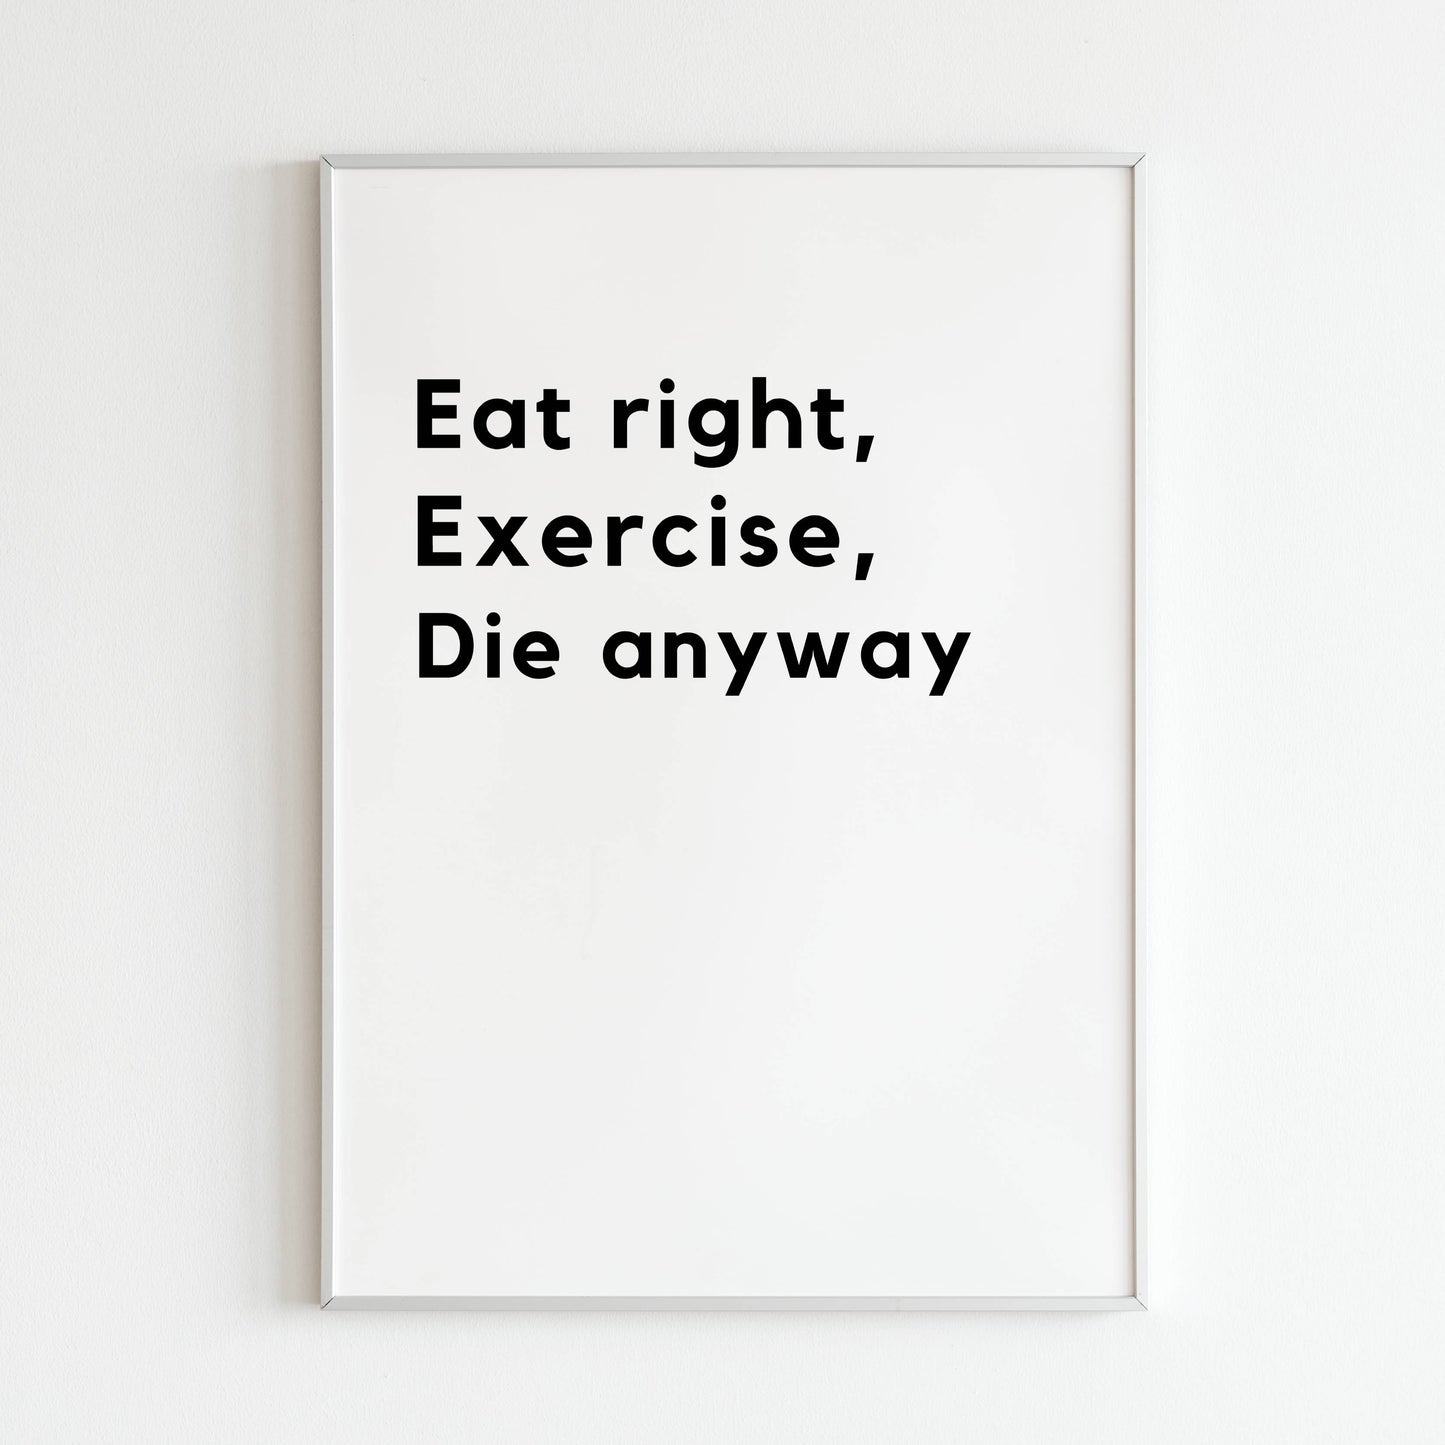 Downloadable "Eat right, Exercise, Die anyway